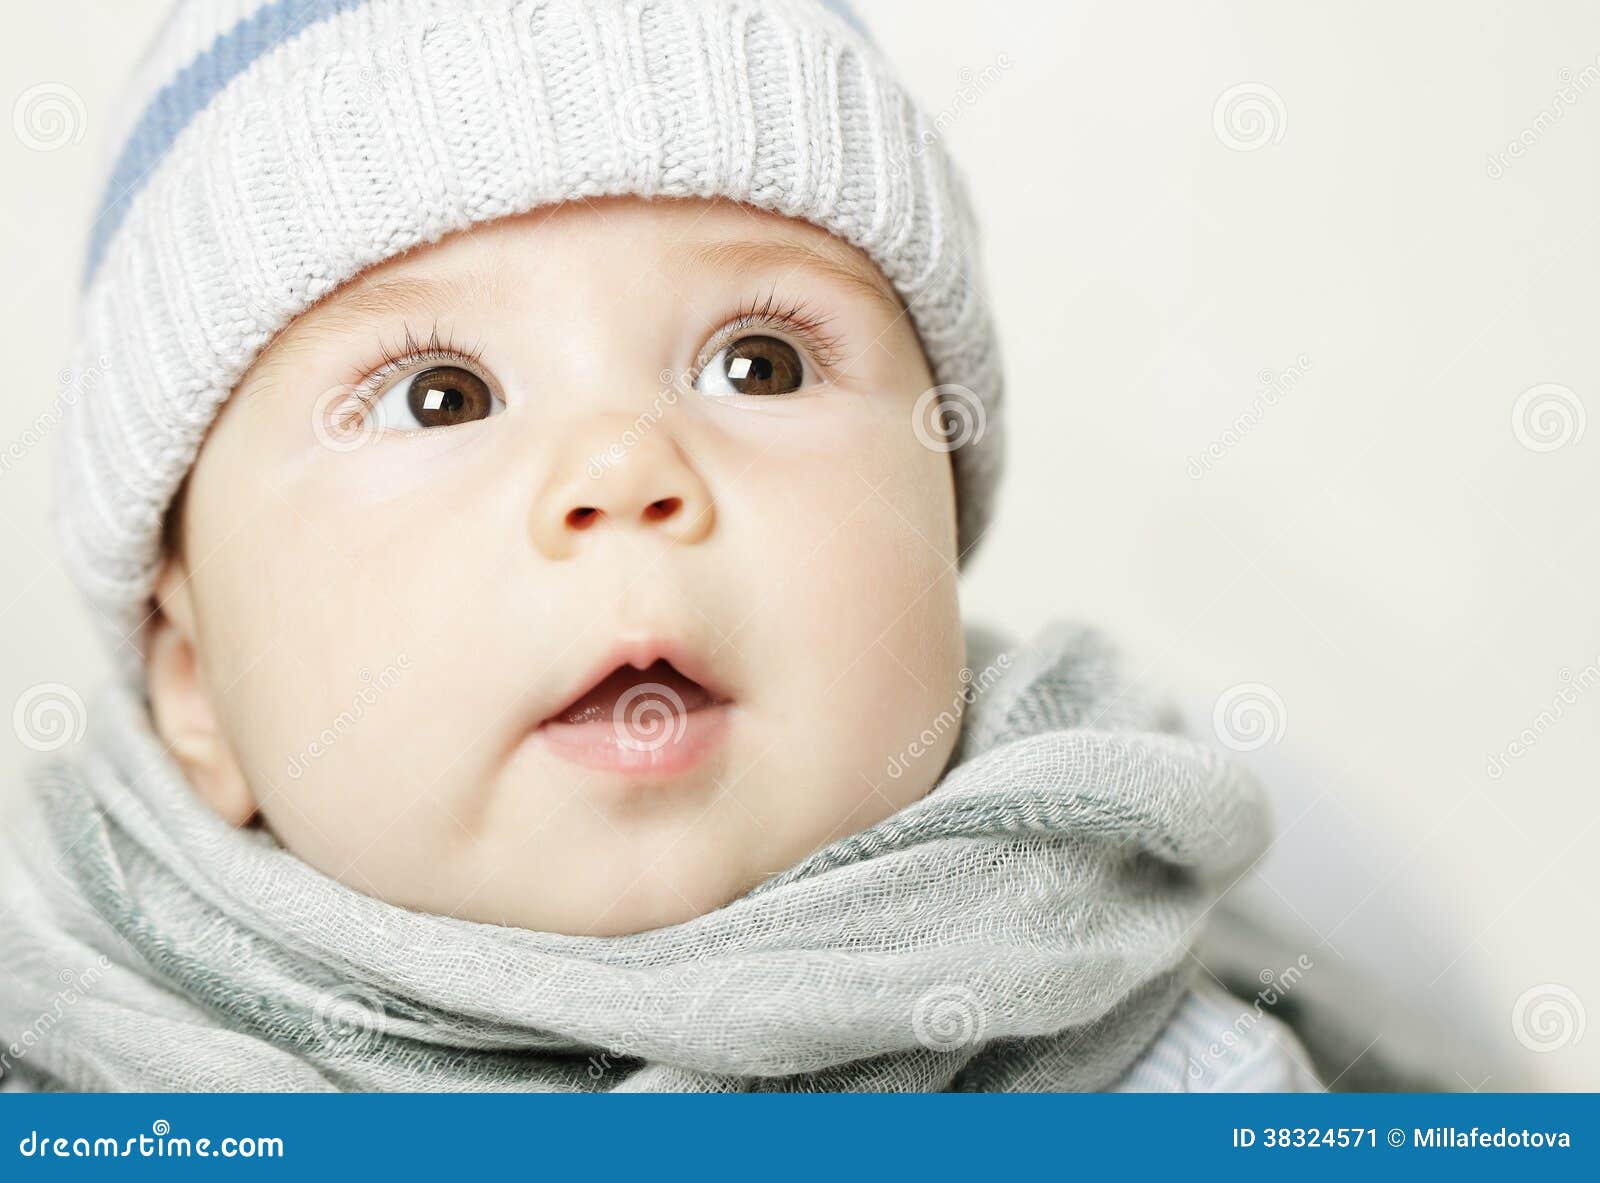 Baby looking up stock image. Image of smiling, surprise - 38324571